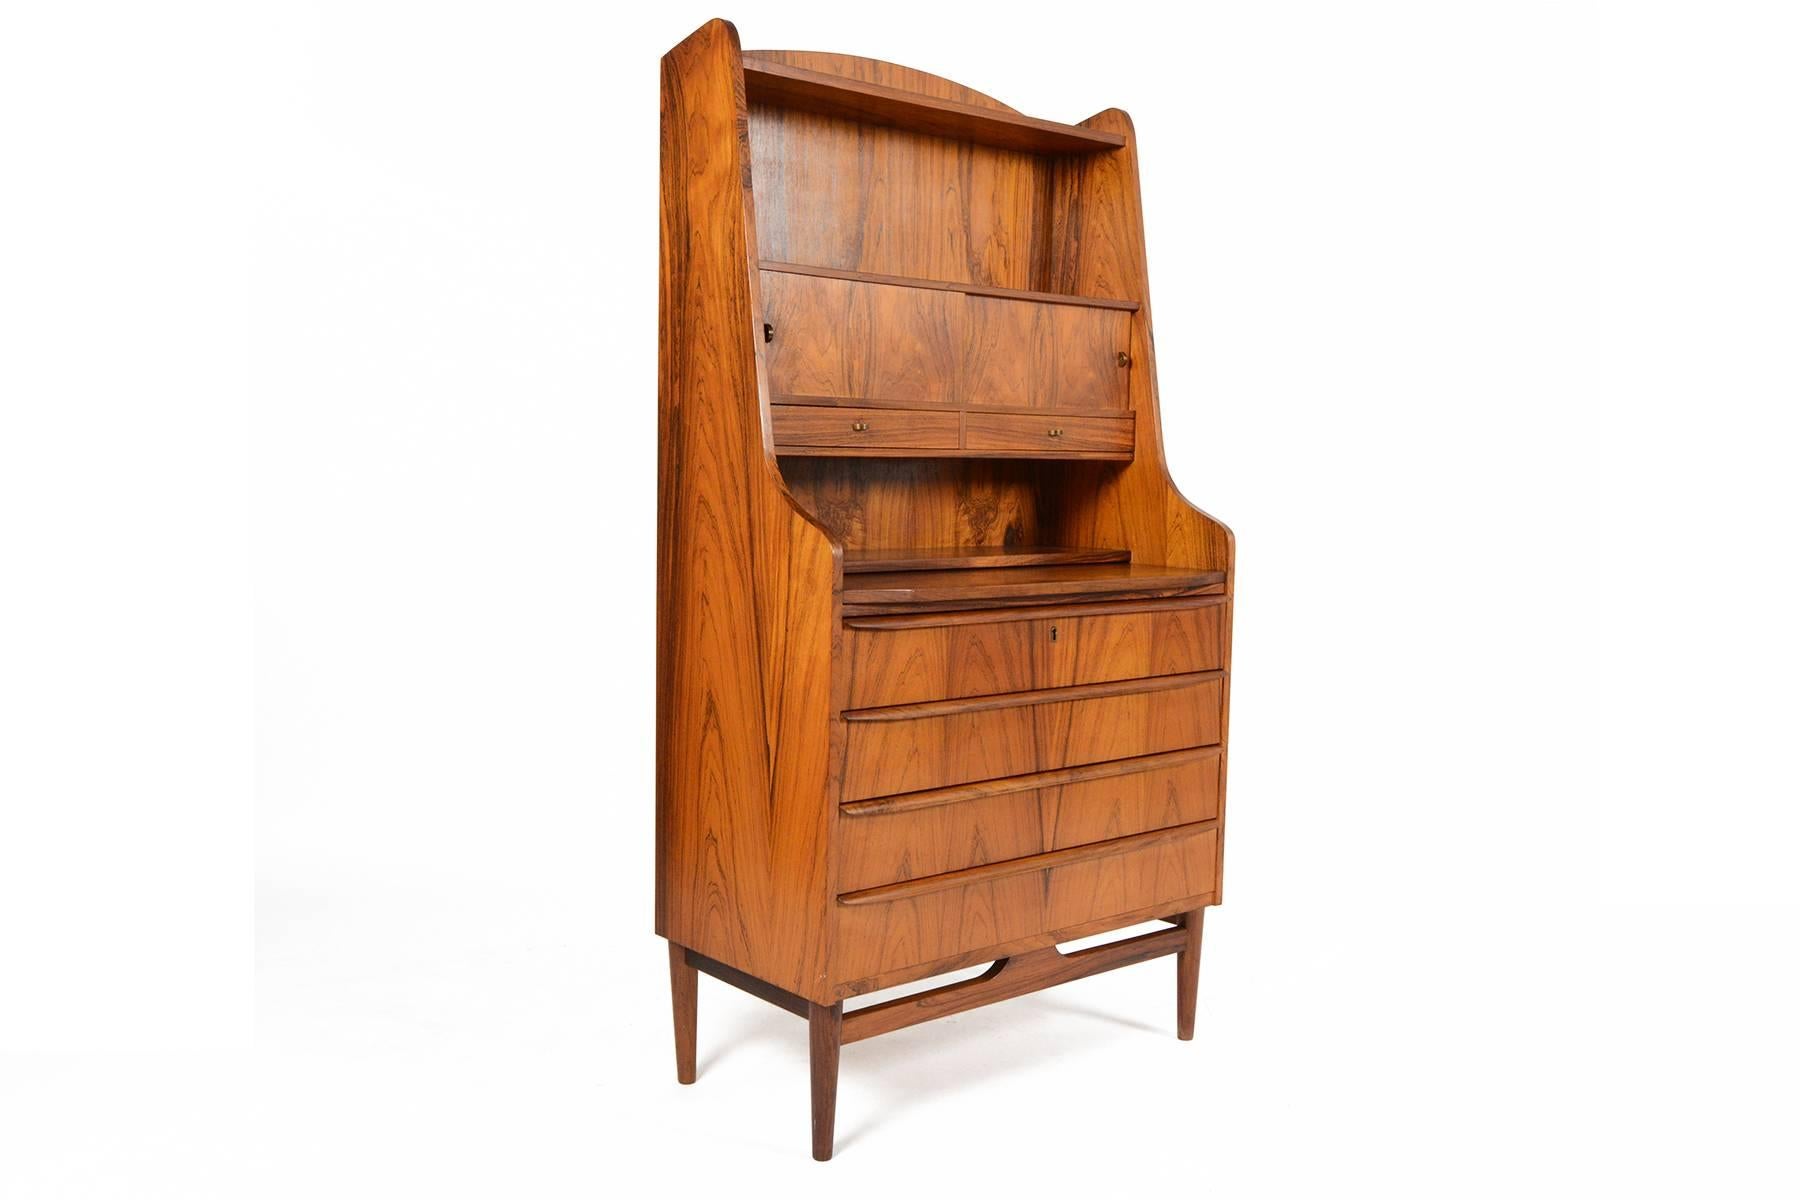 This Danish modern Mid-Century secretary desk is fantastically preserved. Crafted in Brazilian rosewood, this gorgeous piece features a pullout desk surface. A cubby is concealed with two doors with brass crescent pulls. Four large lower drawers